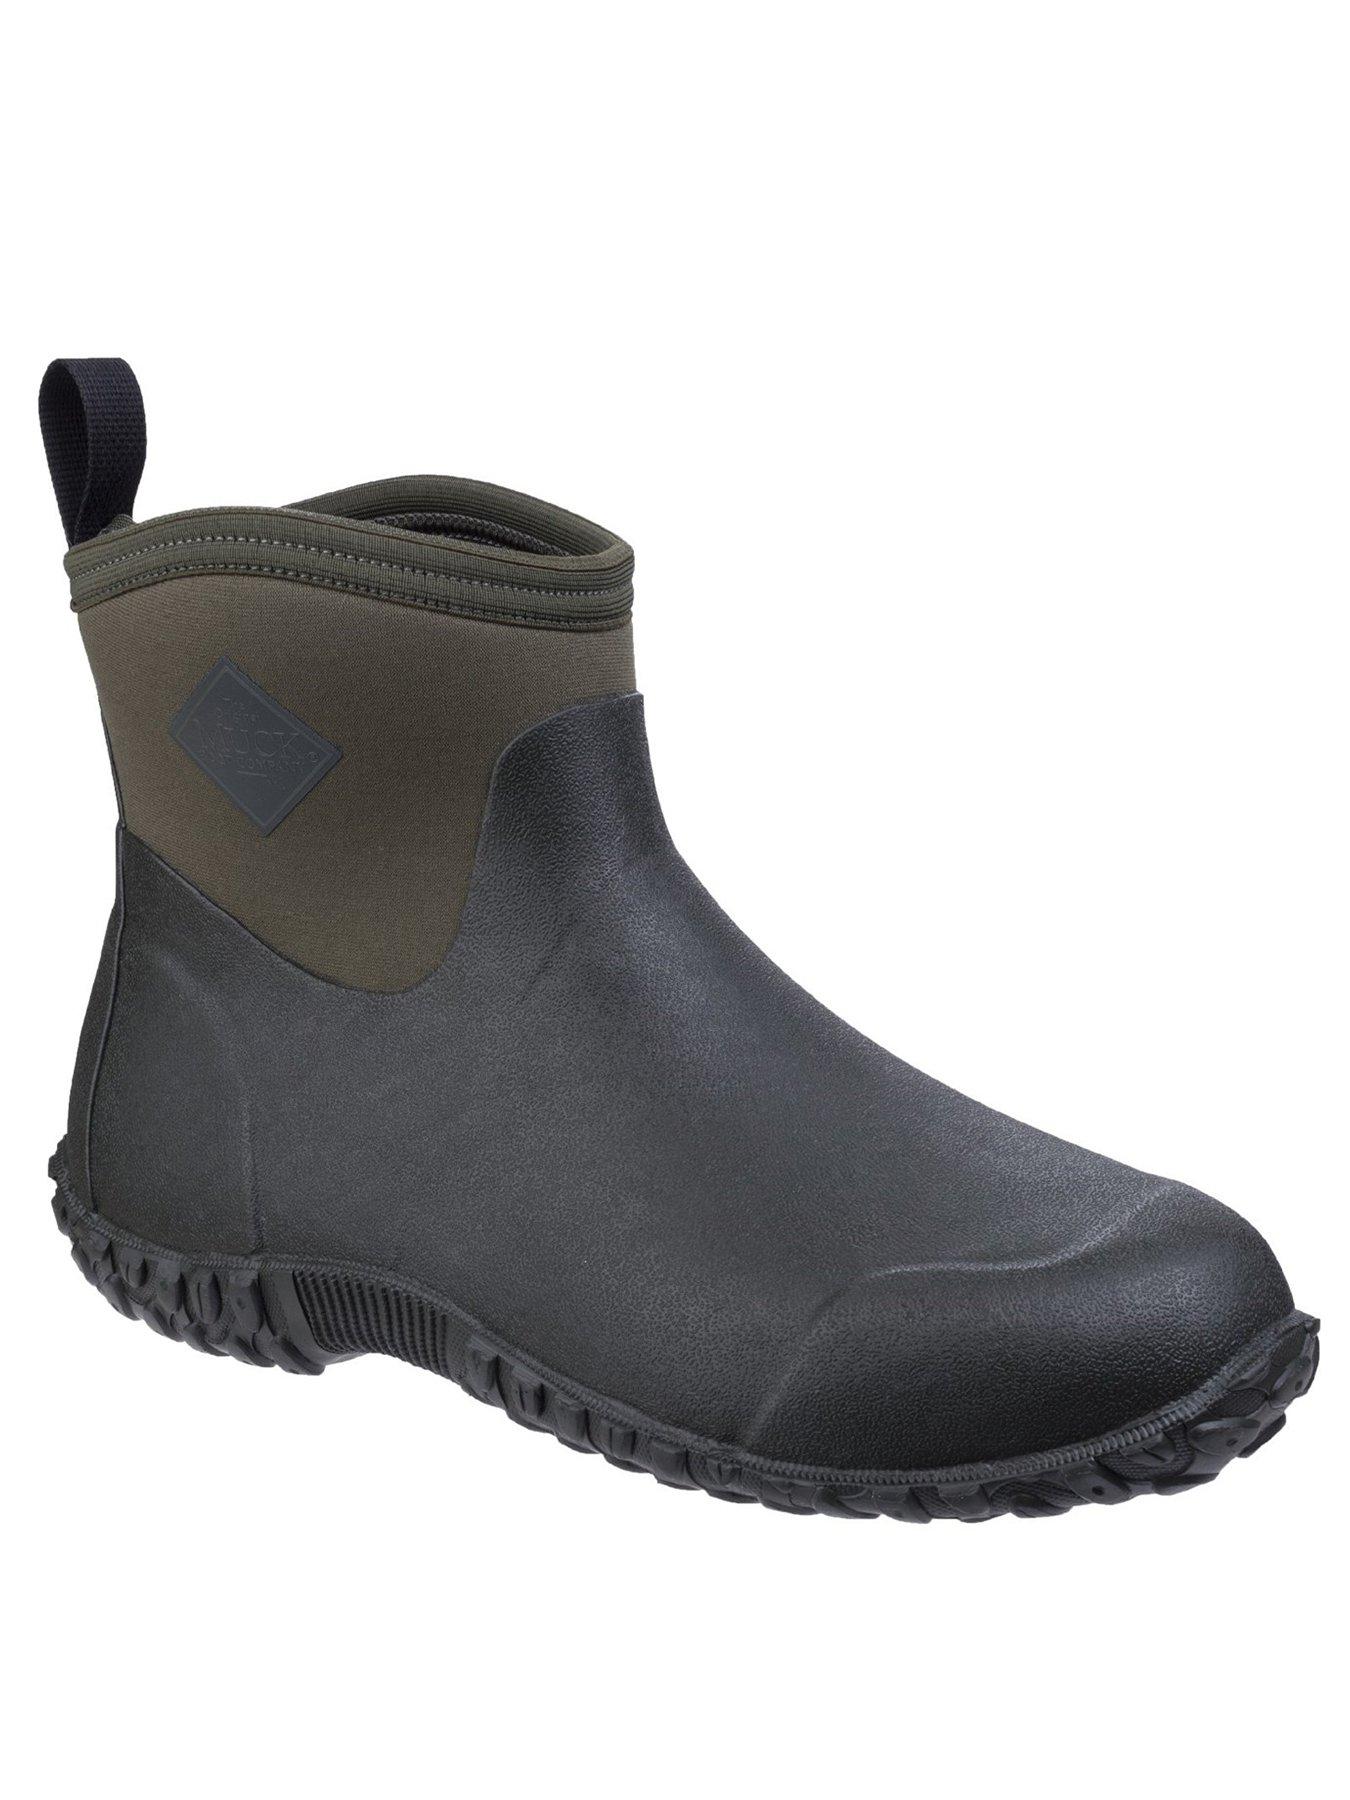 Shoes & boots M's Muckster II Ankle Welly - Moss